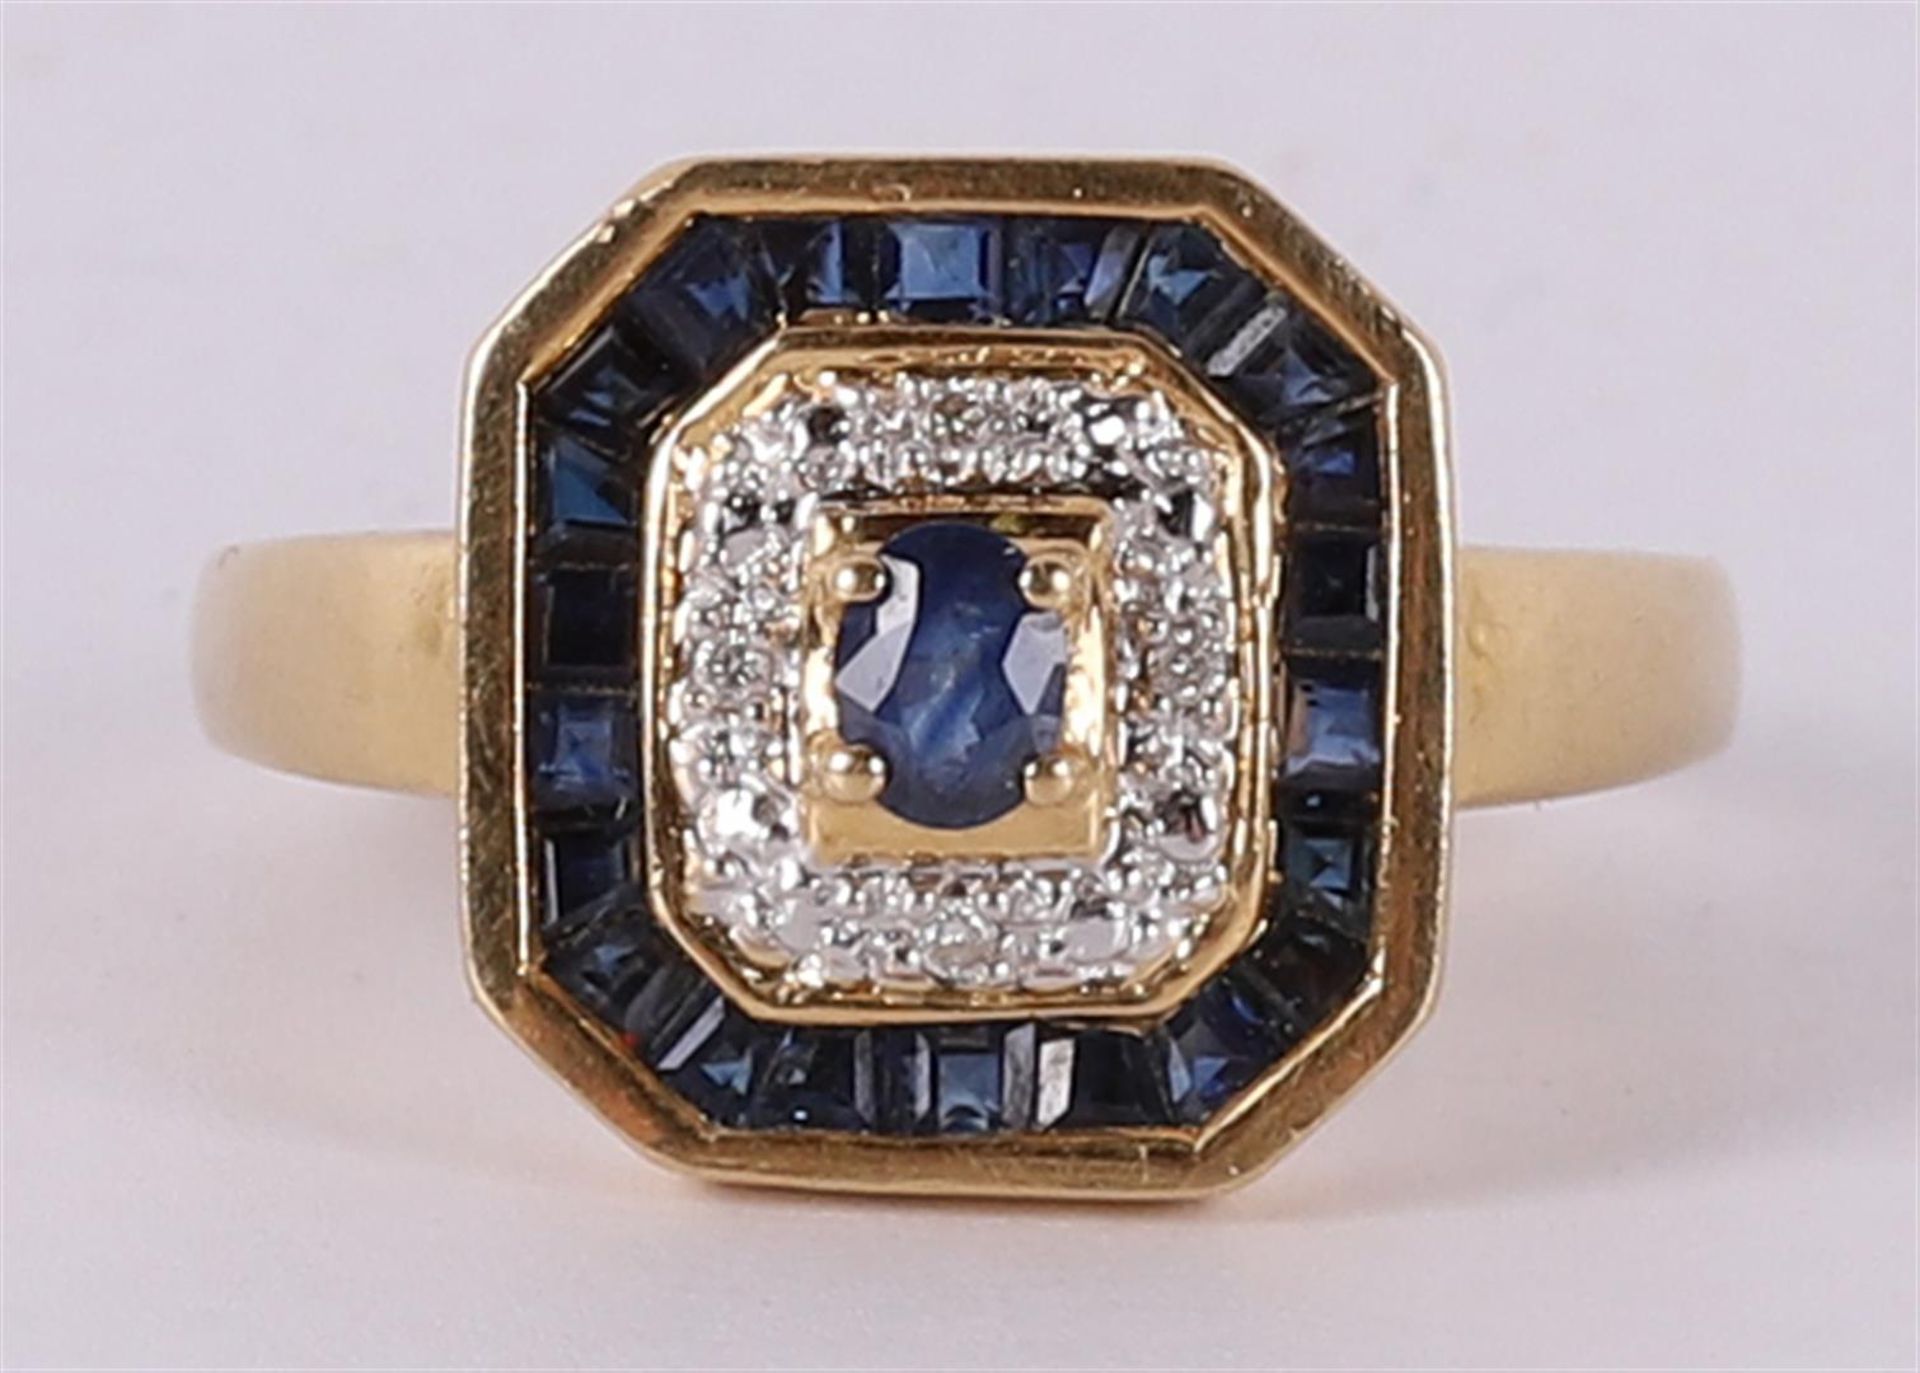 An 18 kt 750/1000 gold ring with 4 brilliants and 23 facet cut blue sapphires. Ring size 18.5 mm.